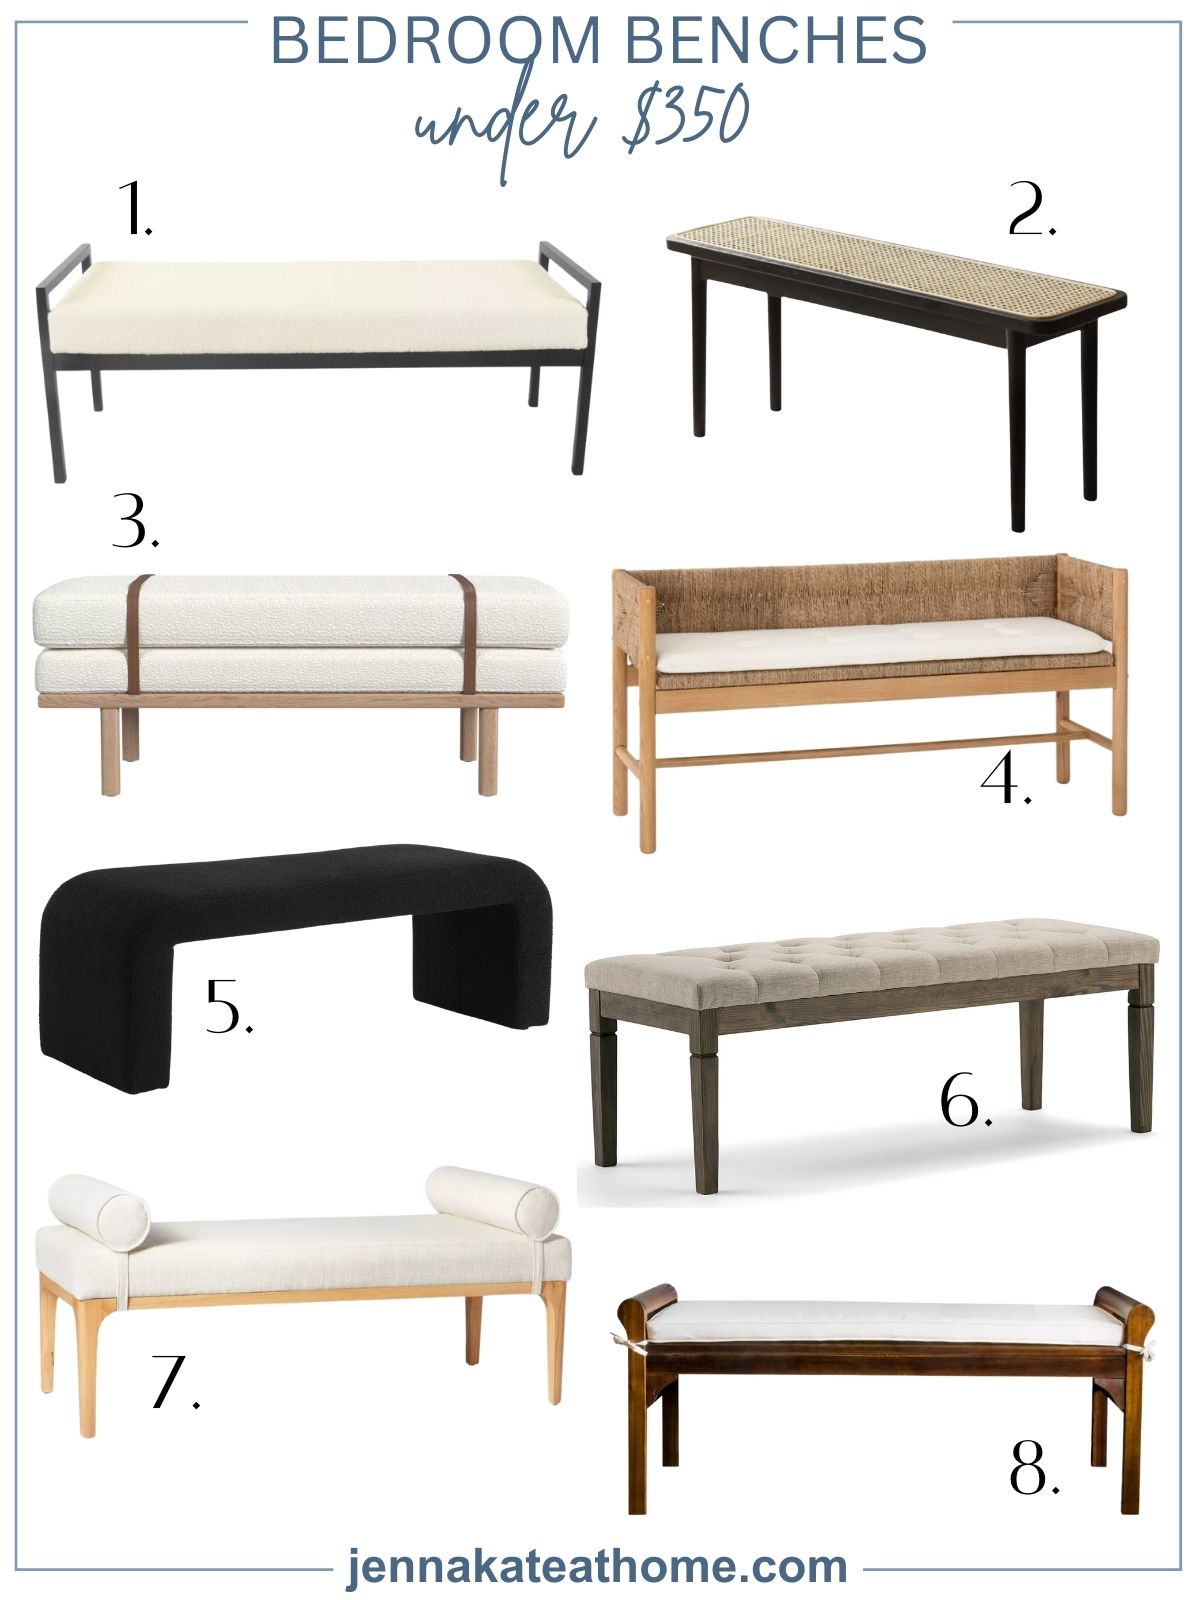 a collage of my favorite bedroom benches under $350